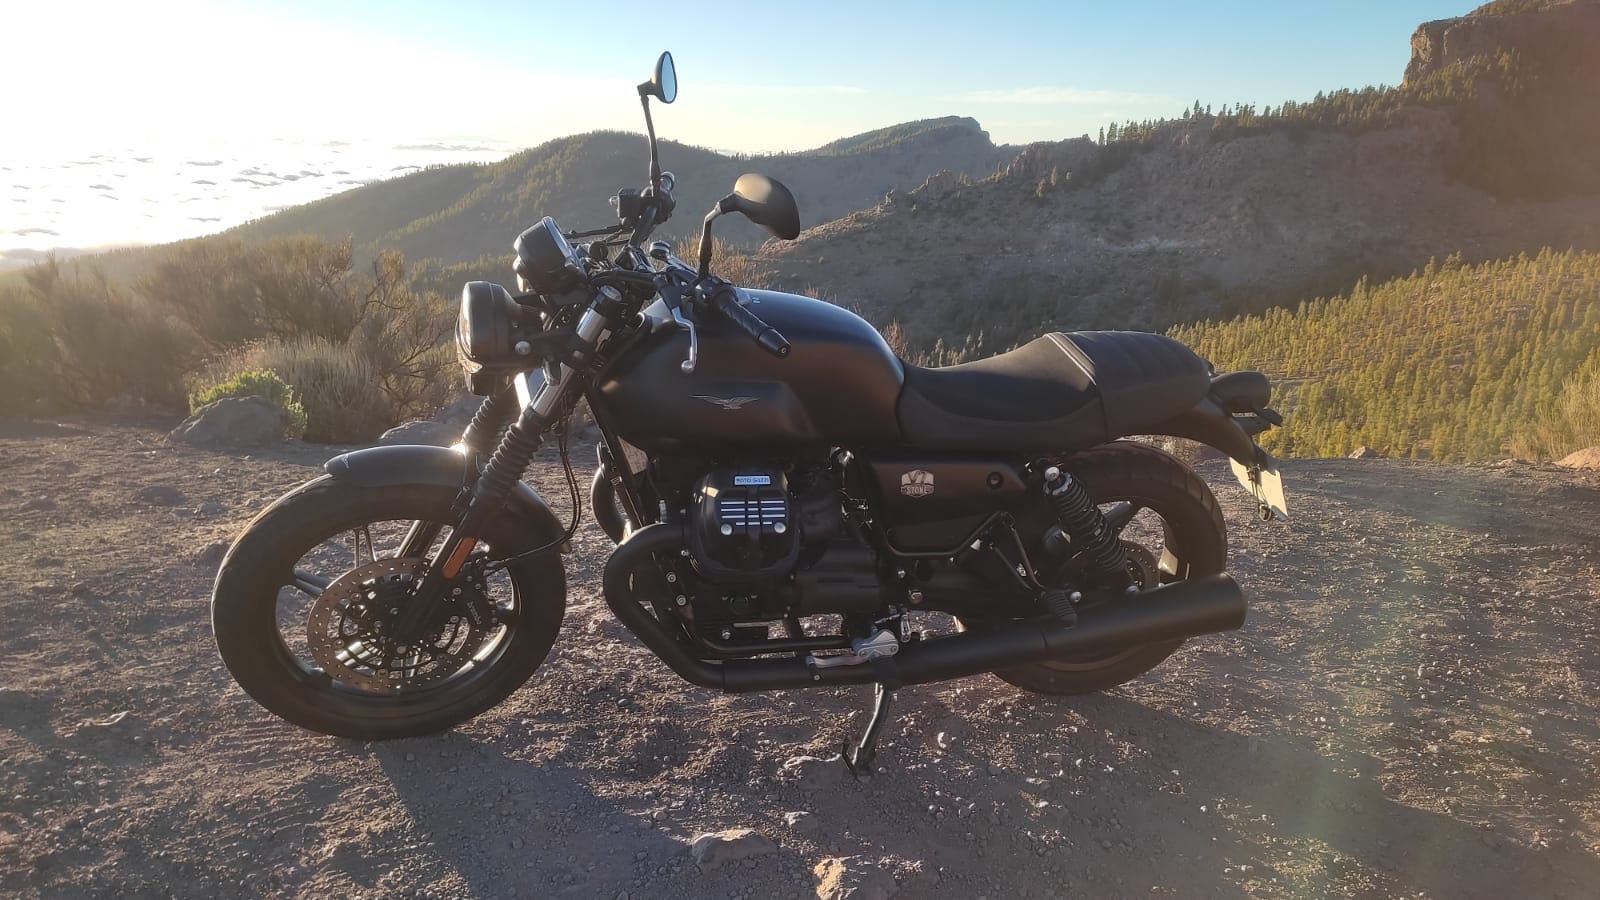 A black motorcycle is parked on the side of a dirt road